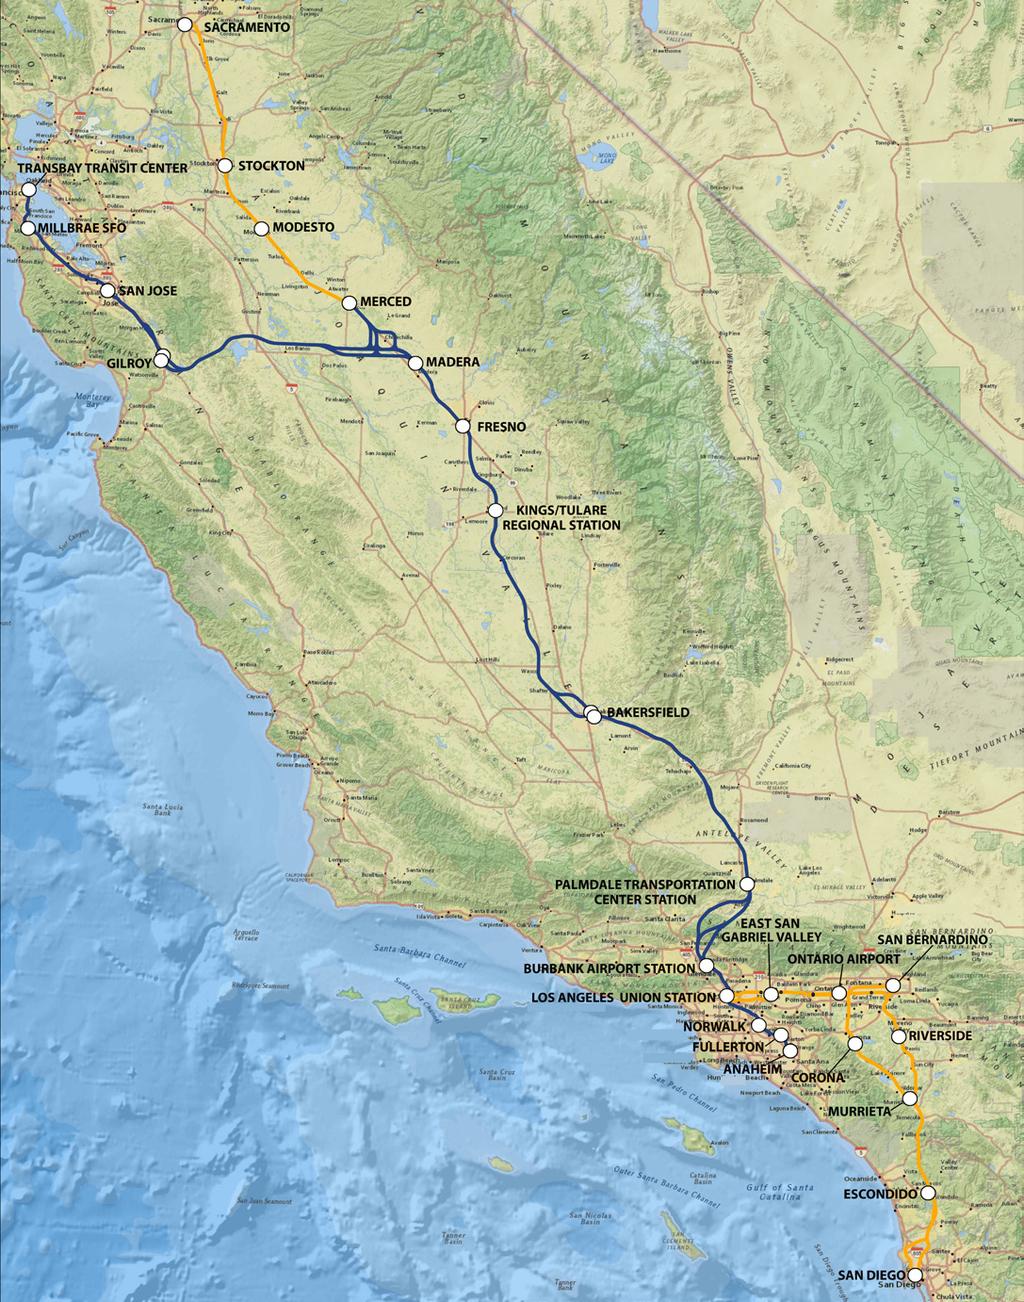 N FIGURE 1 California s High-Speed Rail System High-speed rail will connect cities across California in two phases.